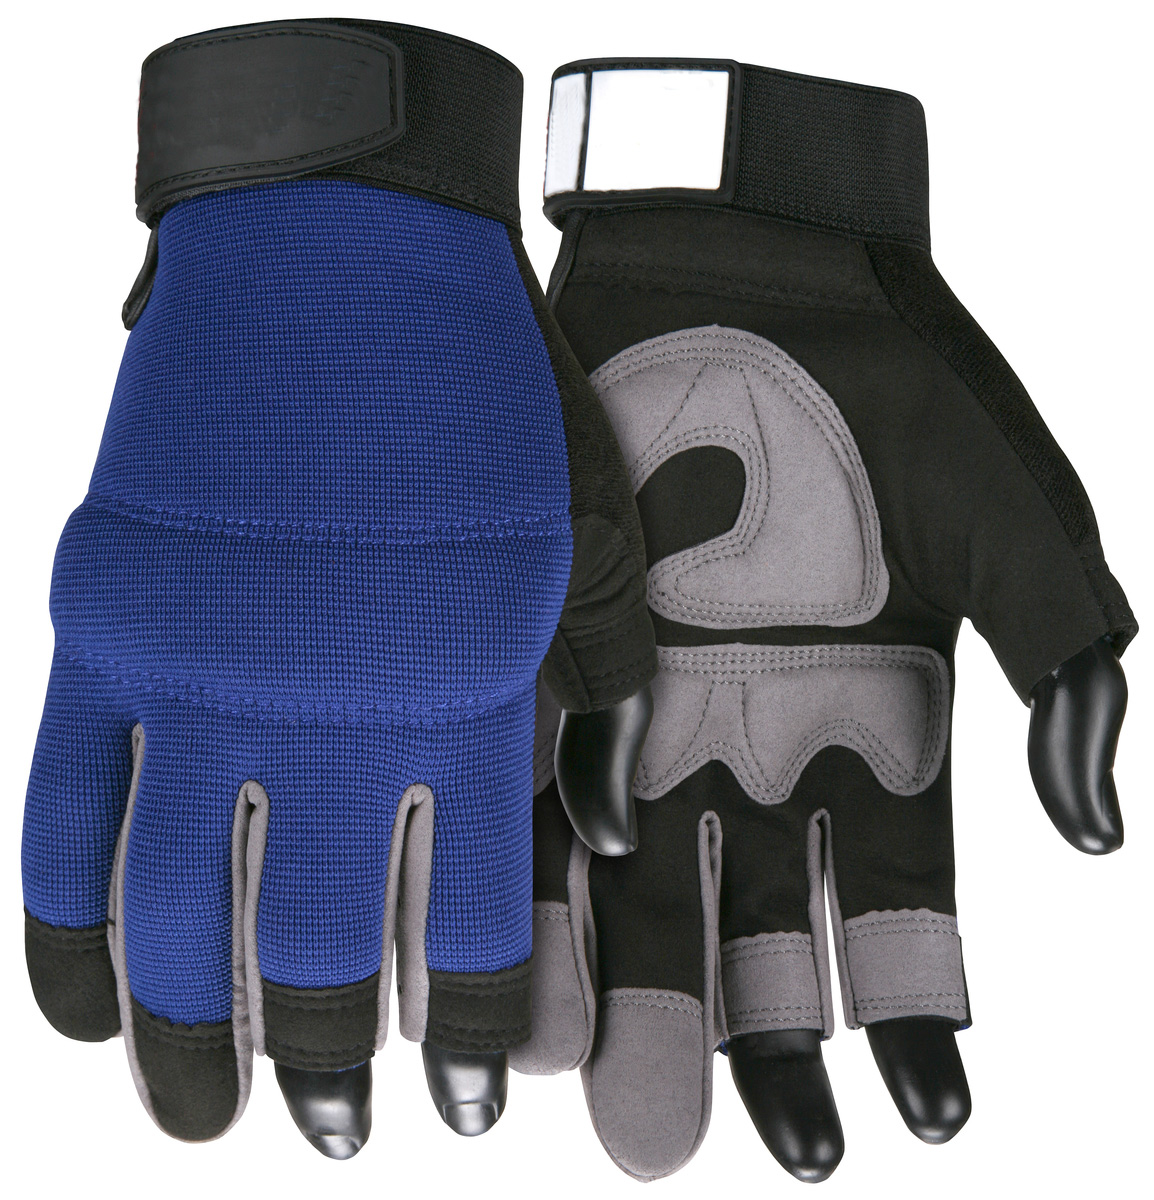 spandex back three fingerless design durable protection hand safety work gloves